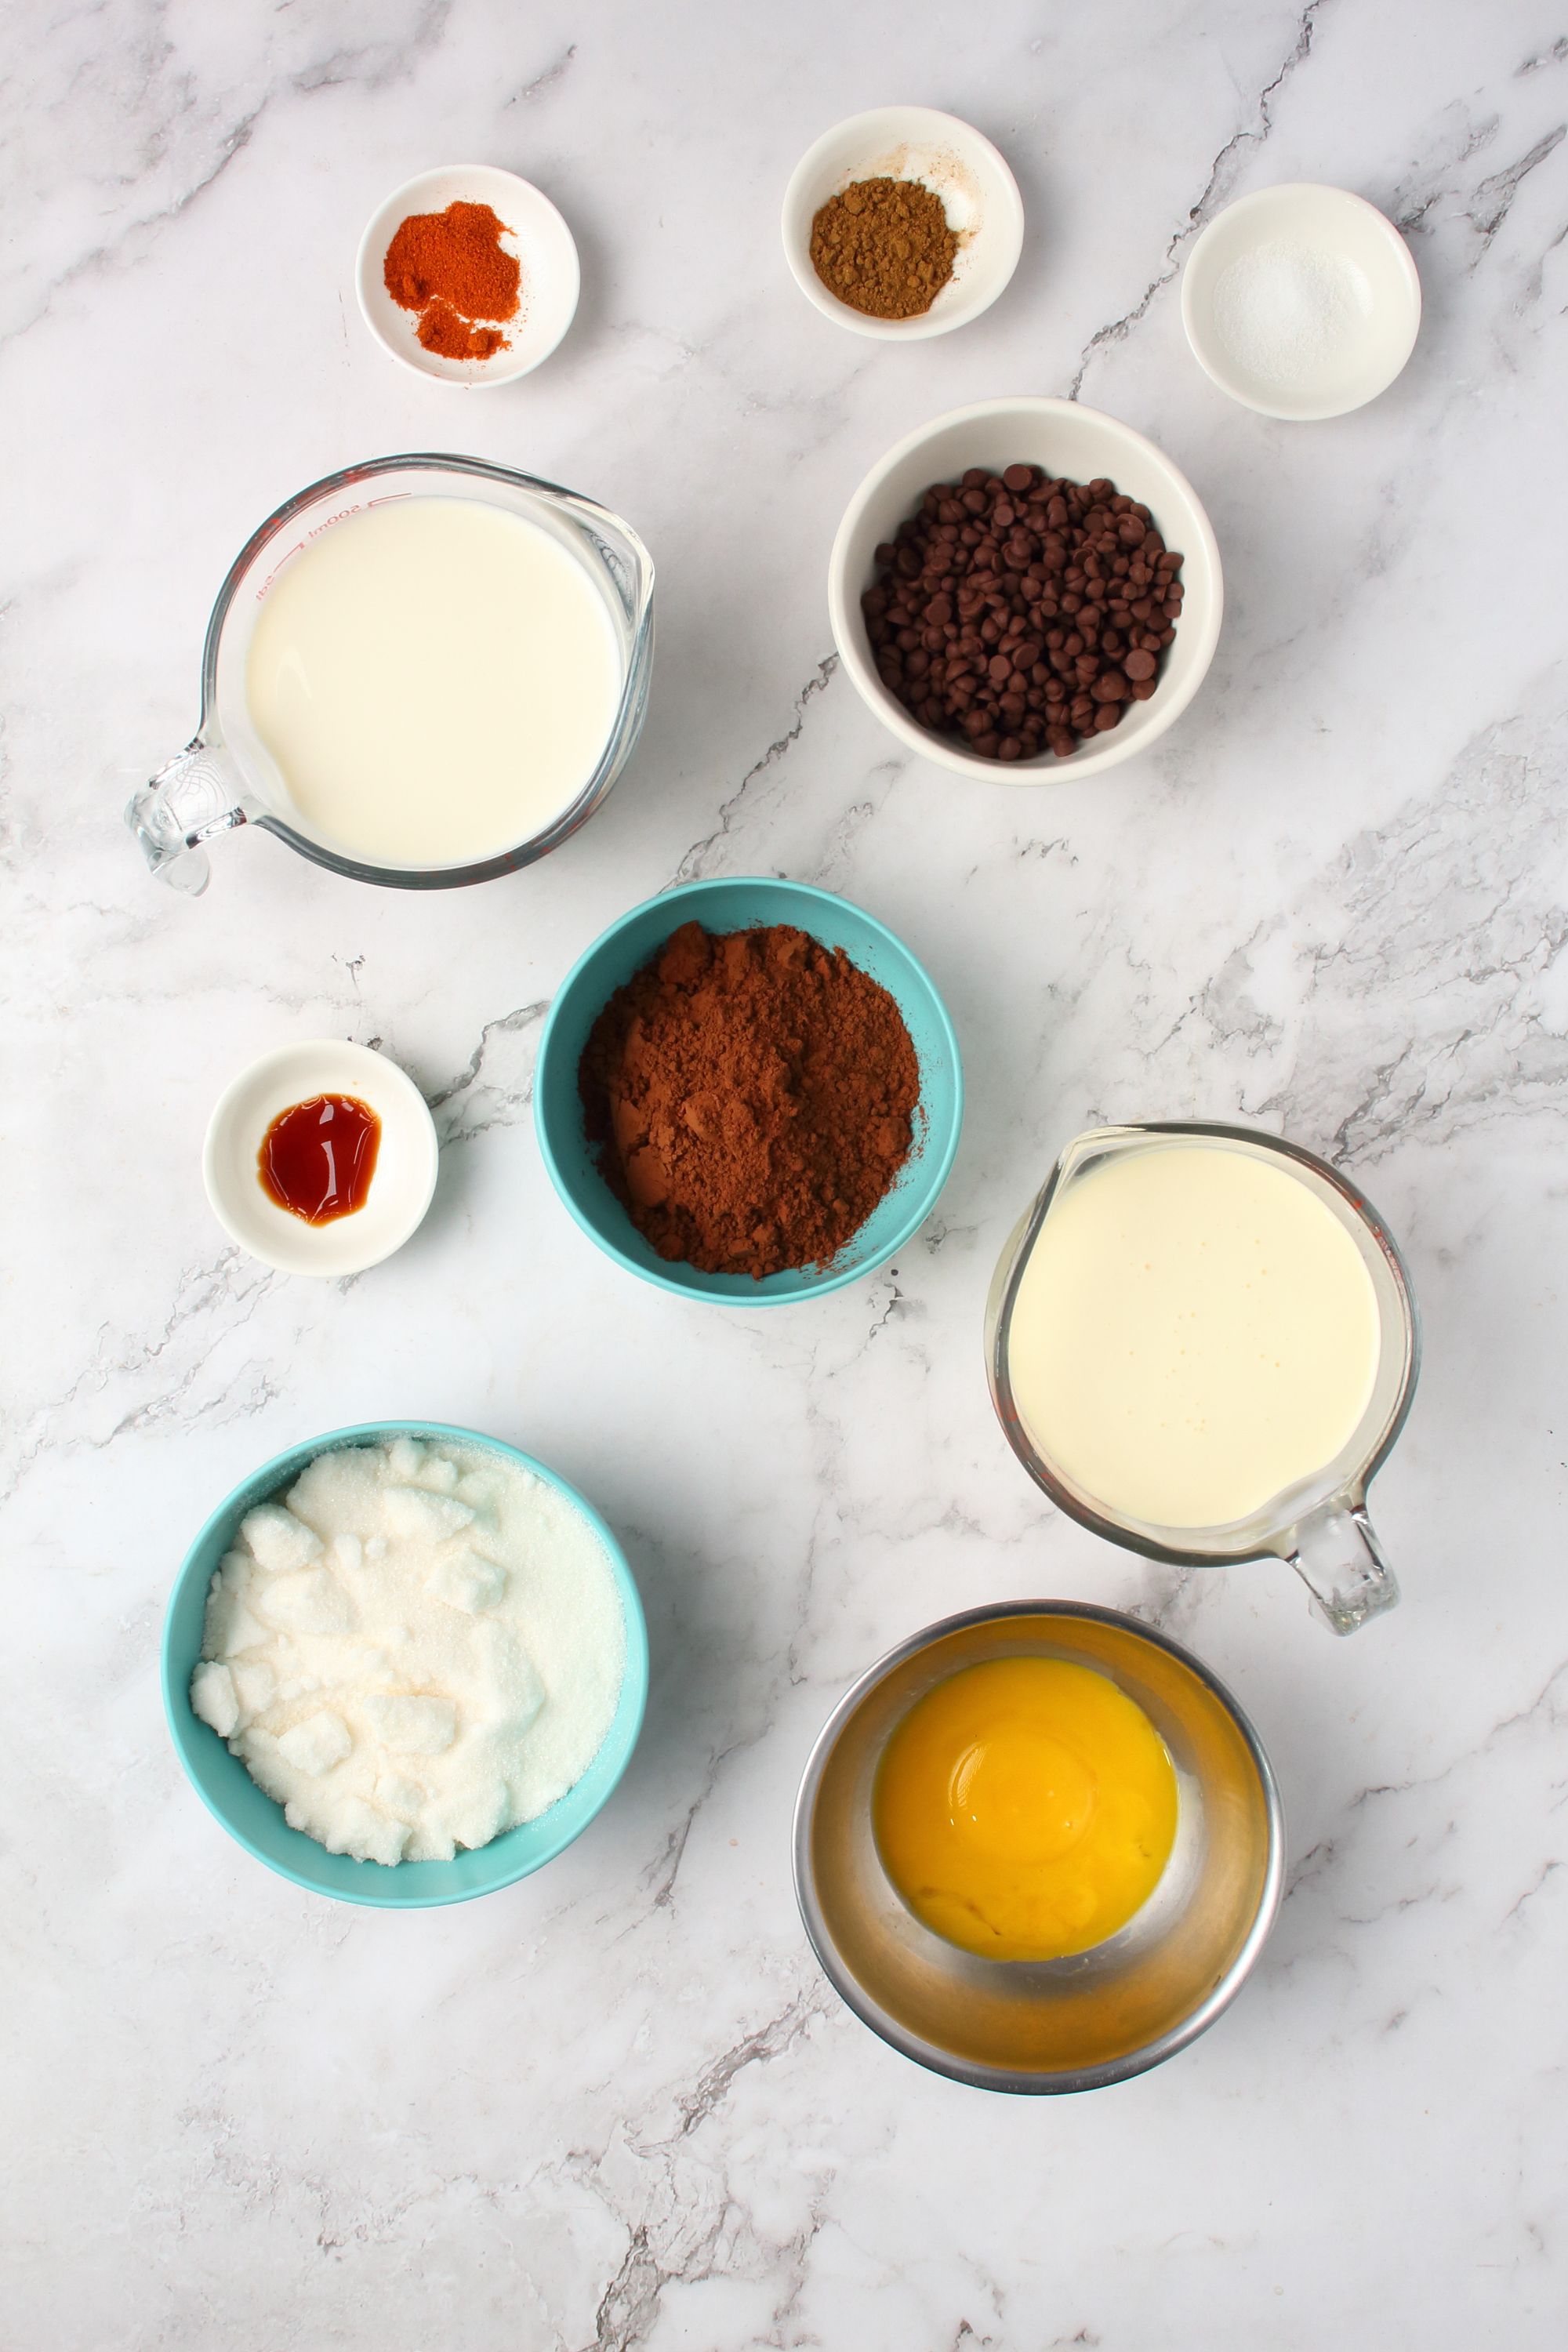 Ingredients for Mexican Hot Chocolate Ice Cream